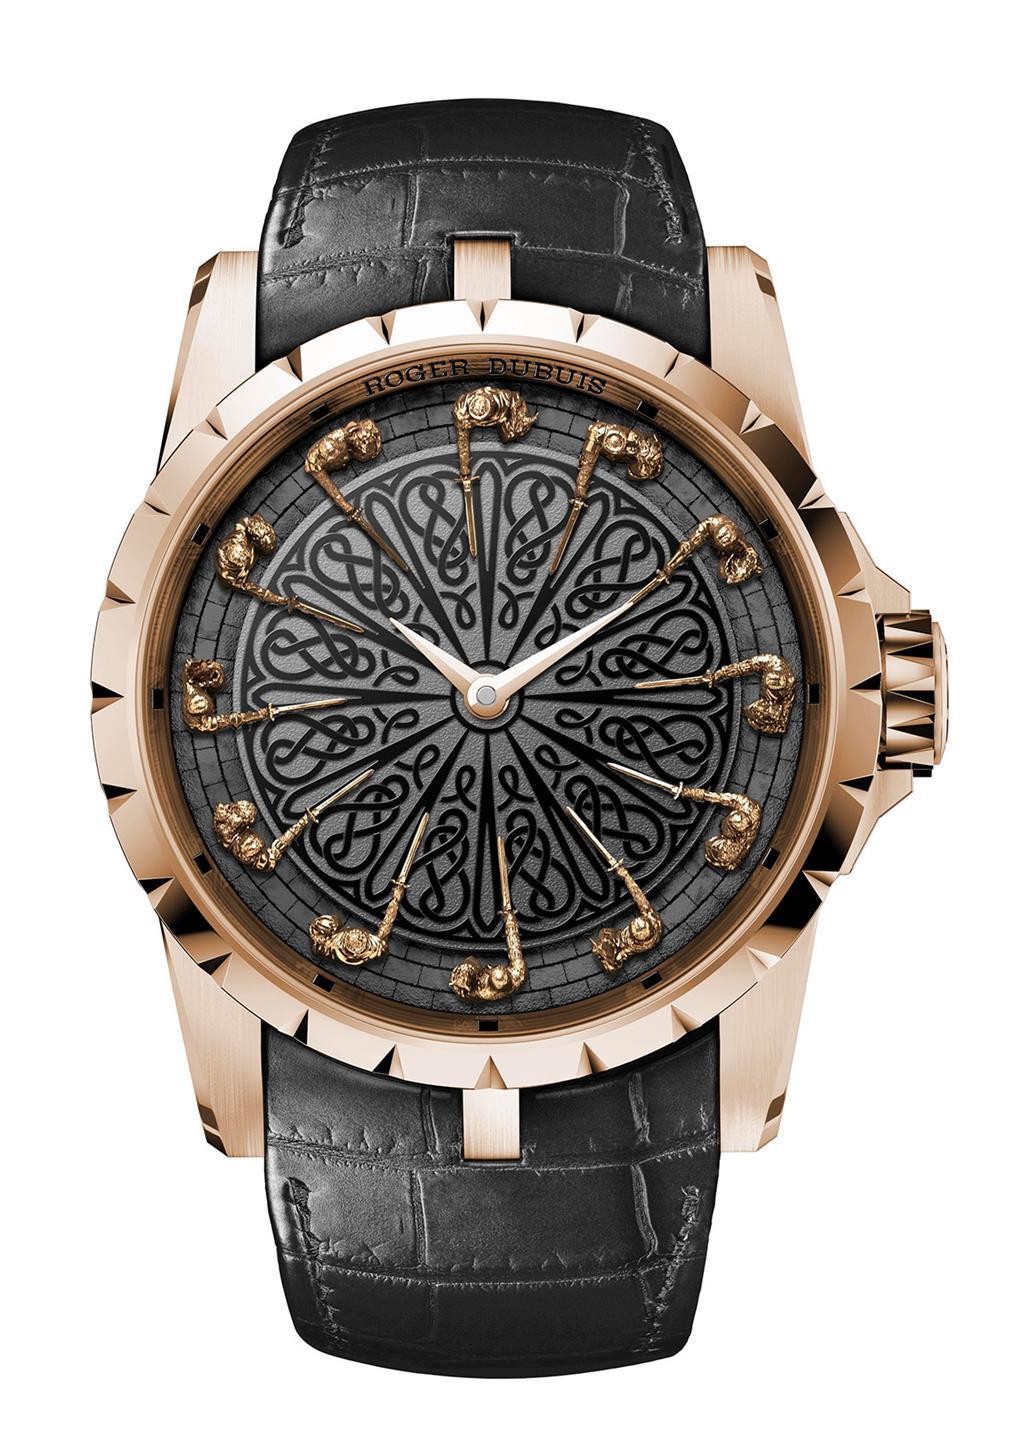 Roger Dubuis Knights of the Round Table III